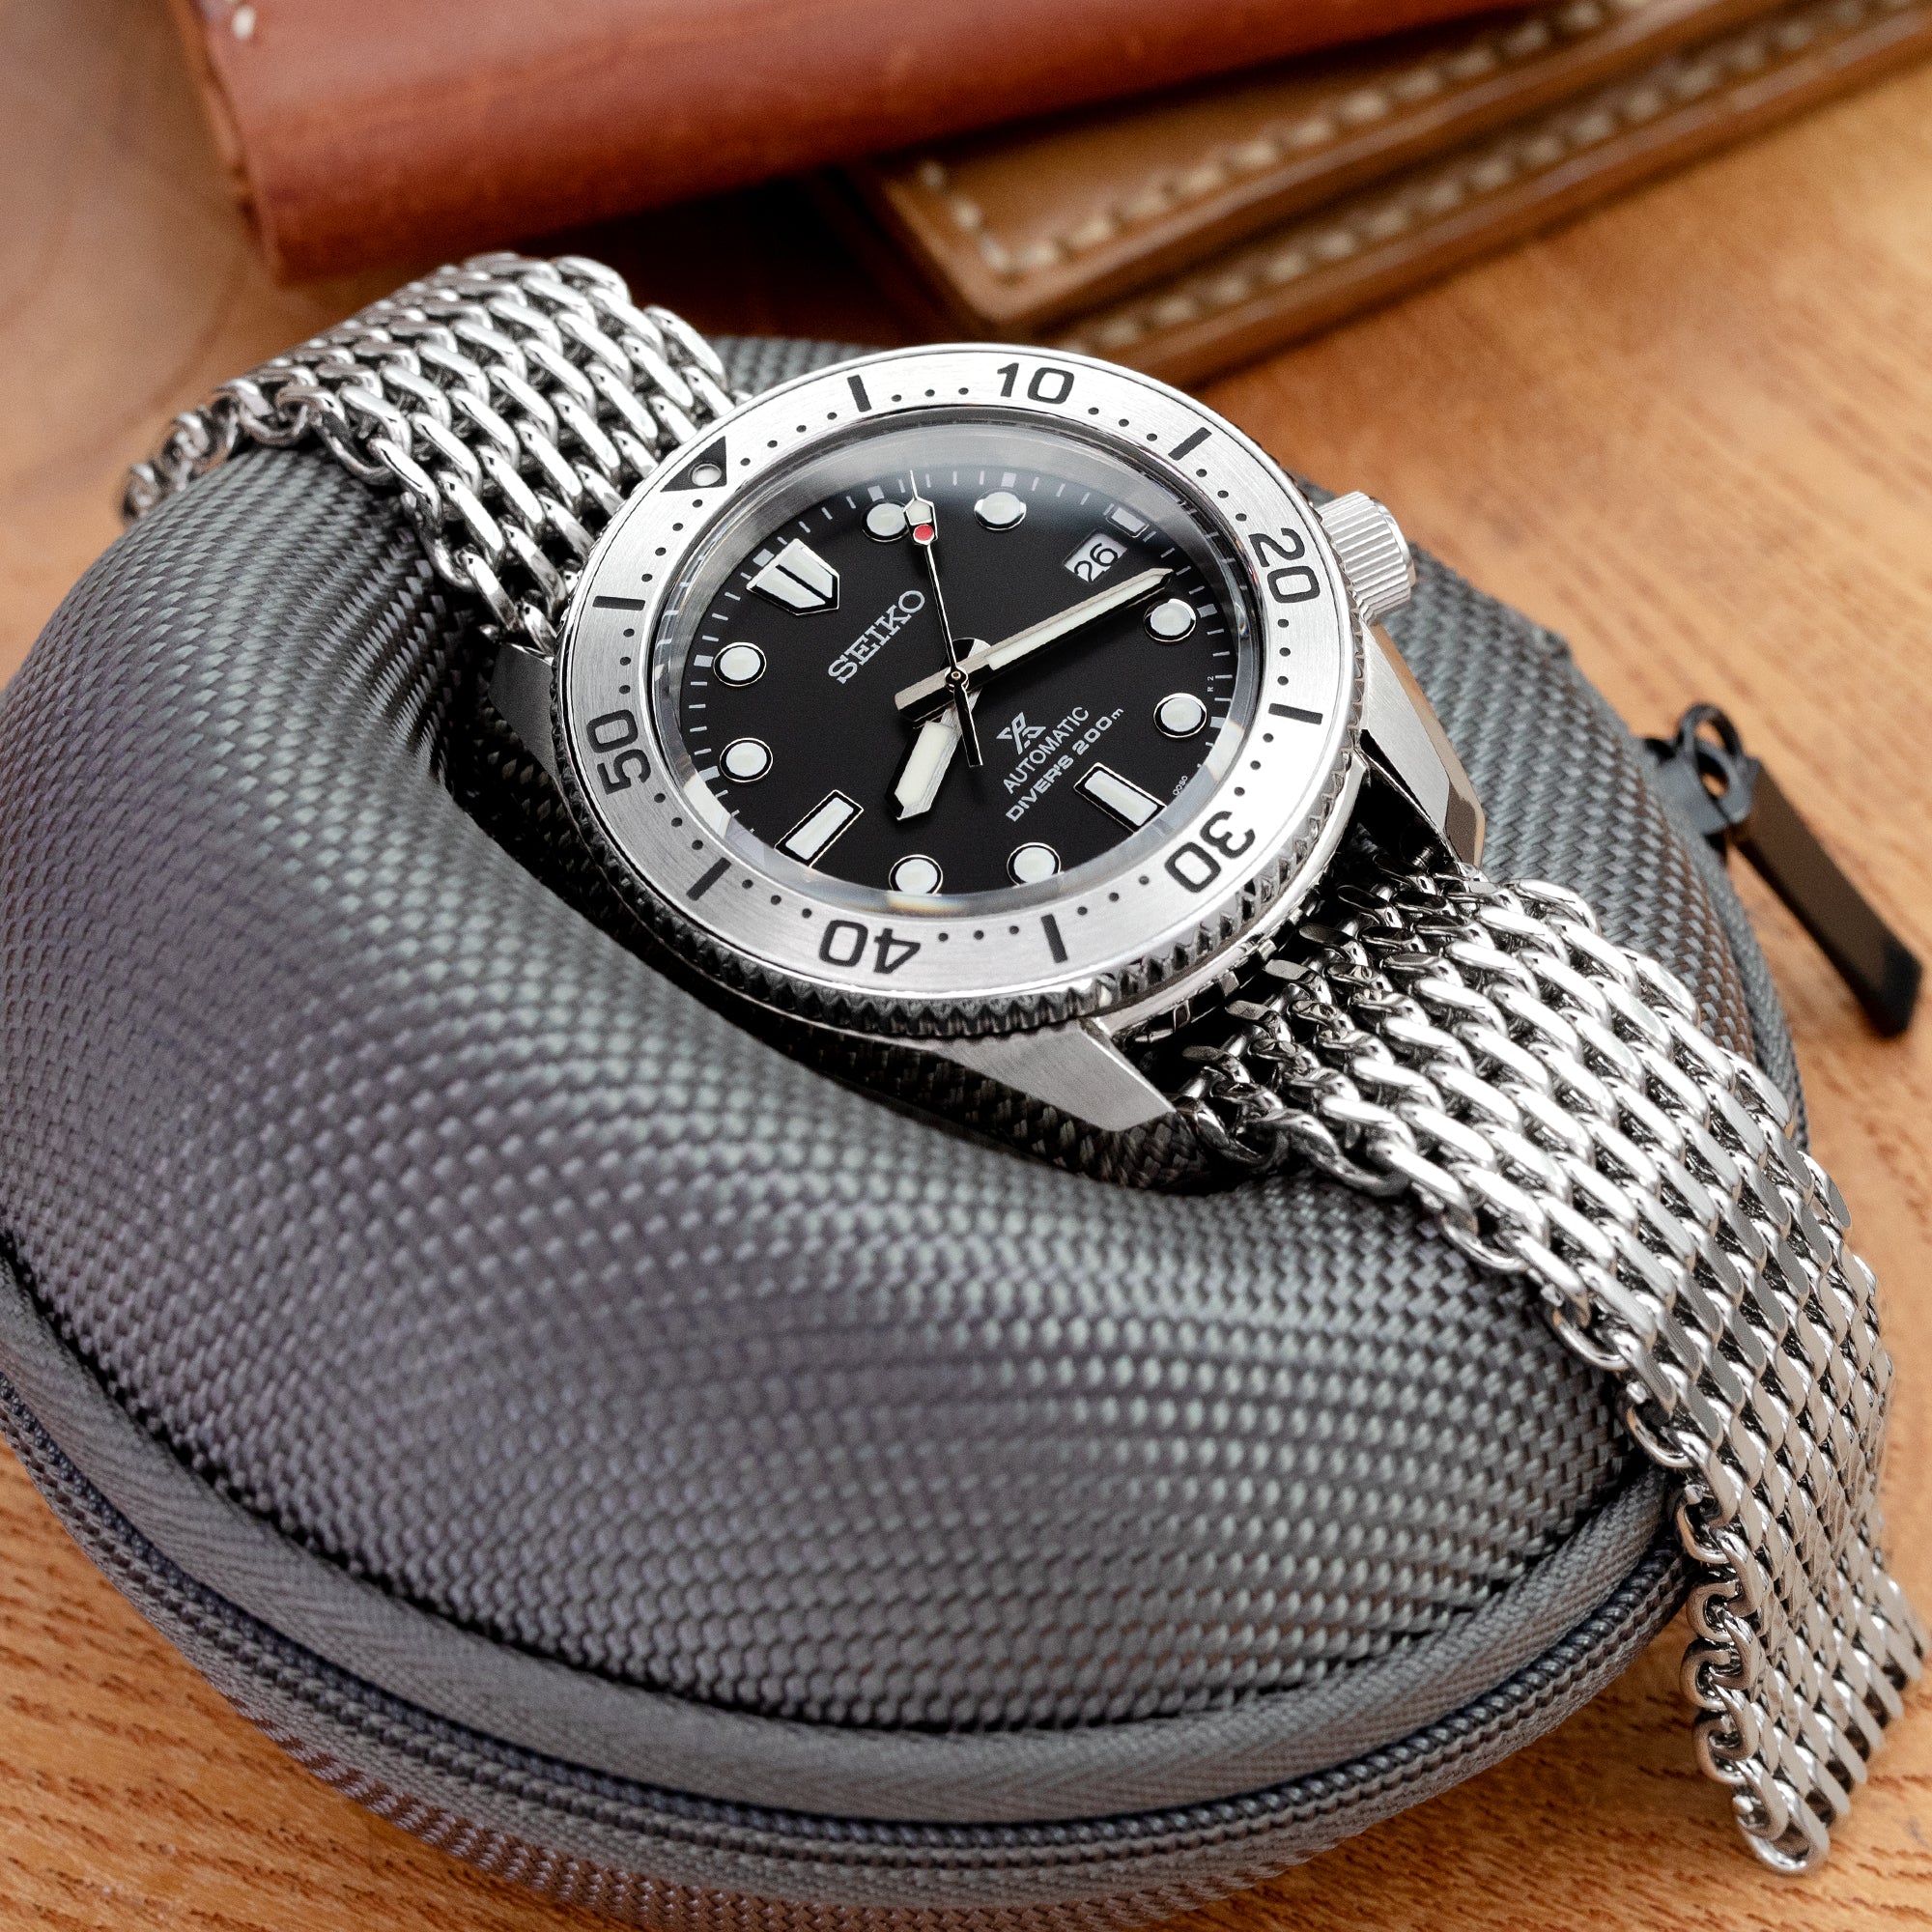 20mm Tapered "SHARK" Mesh Band Stainless Steel Watch Bracelet, V-Clasp, Polished